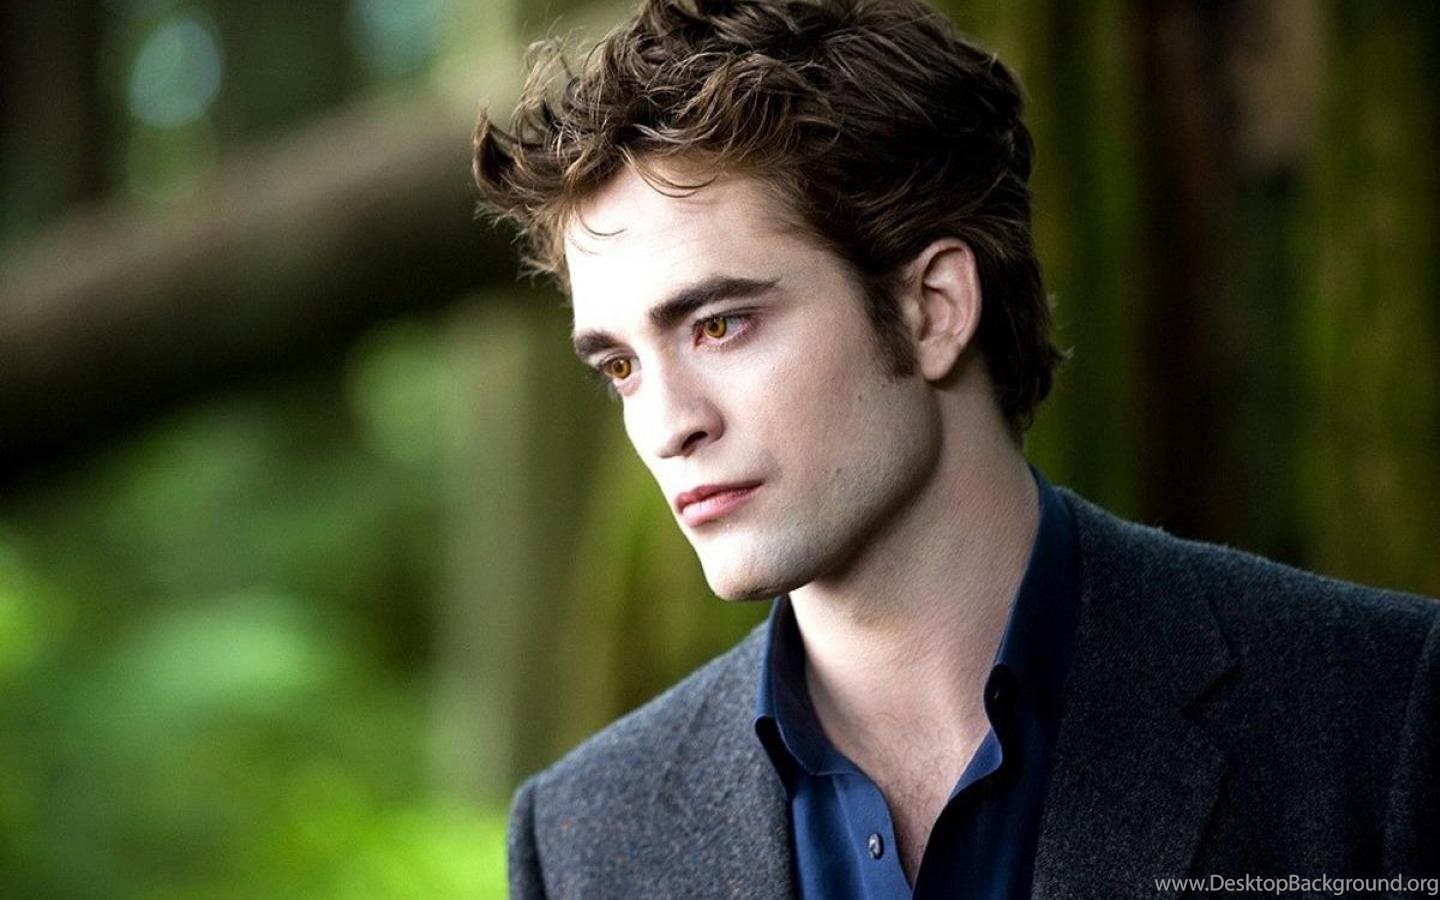 robert pattinson hd wallpapers,hair,face,hairstyle,cool,beauty